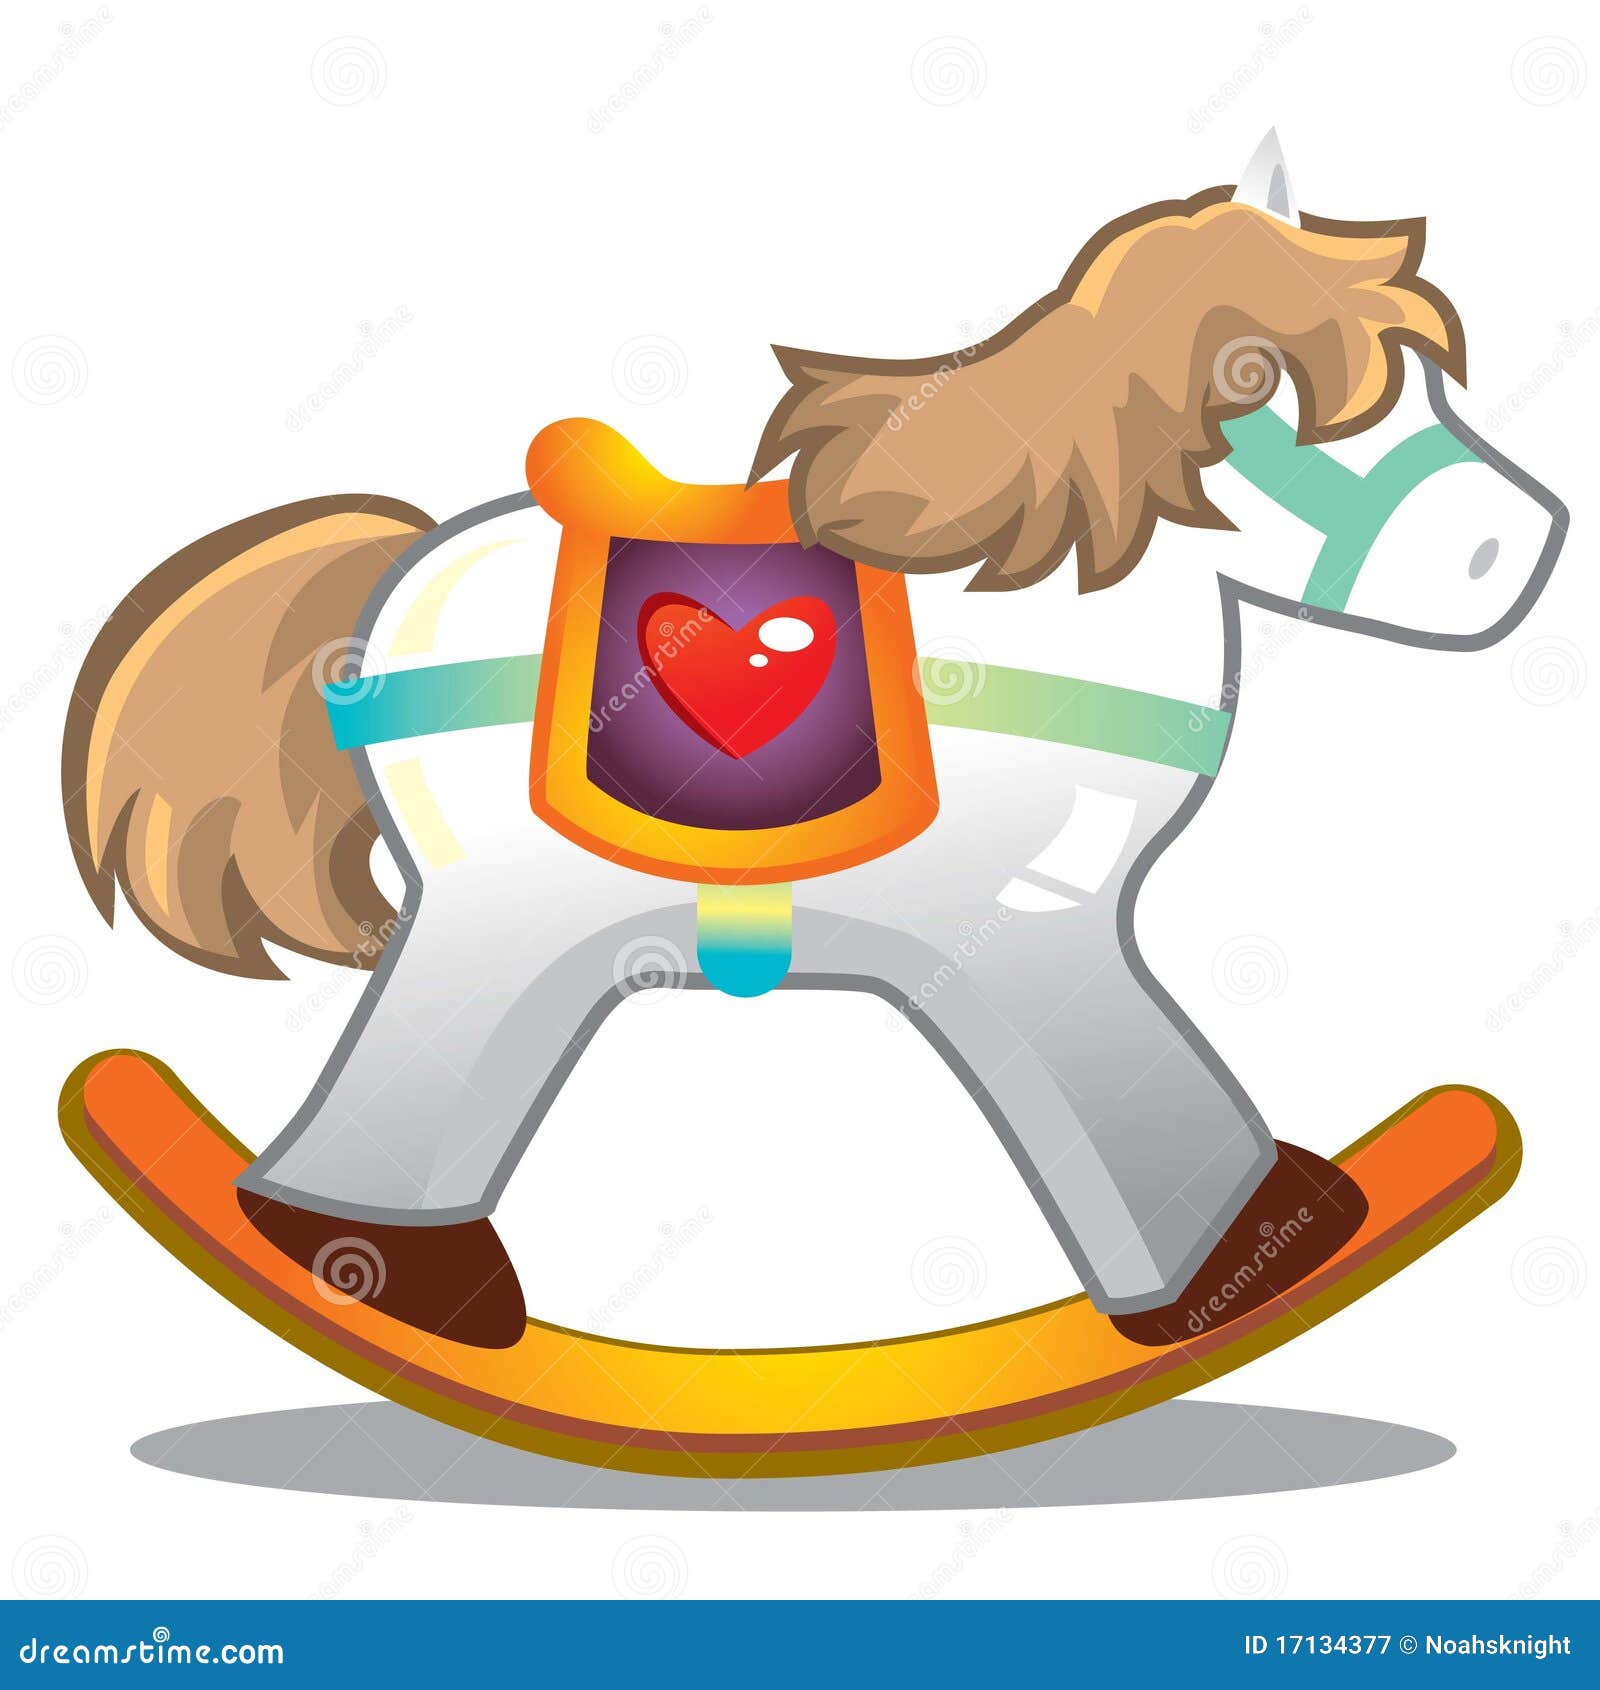 White Rocking Horse Unicorn With Brown Hair And A Heart Saddle.